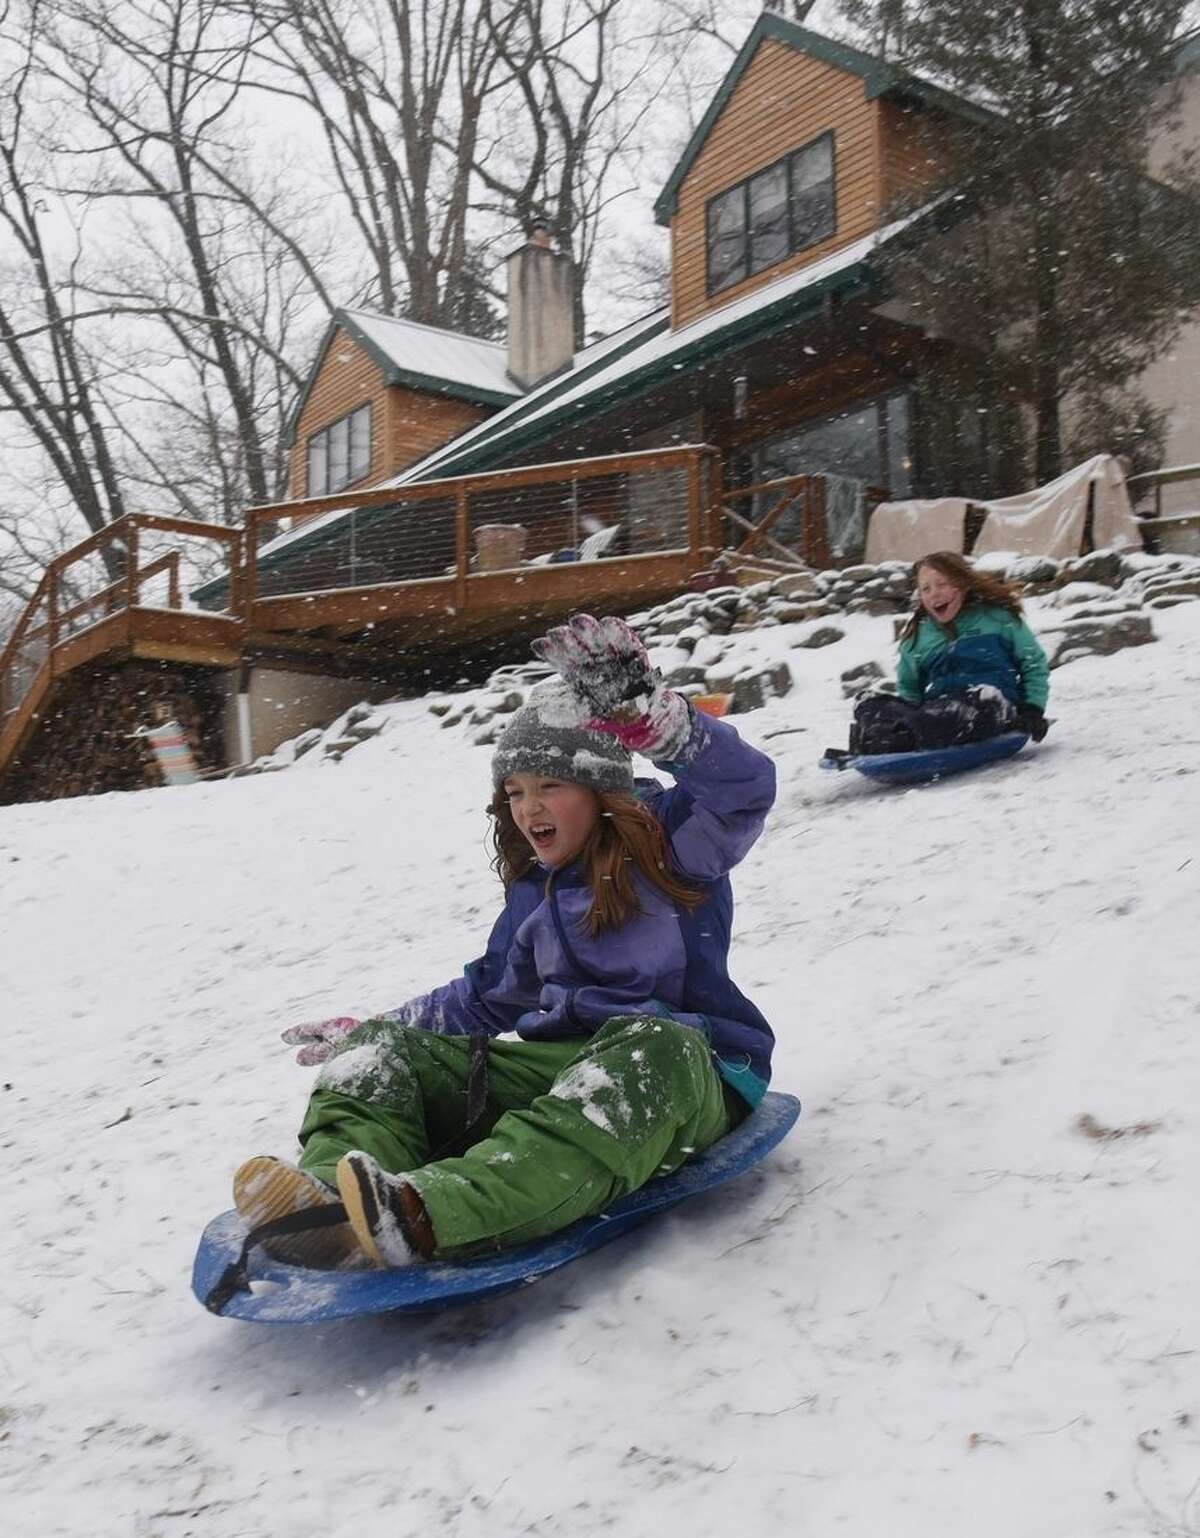 Phoebe Davidson, front, 9, and her friend Helena McConatha Rosle, 10, slide down the hill in front of Phoebe's house Monday, Feb. 15, 2016, in Media, Pa. (Clem Murray/The Philadelphia Inquirer via AP)